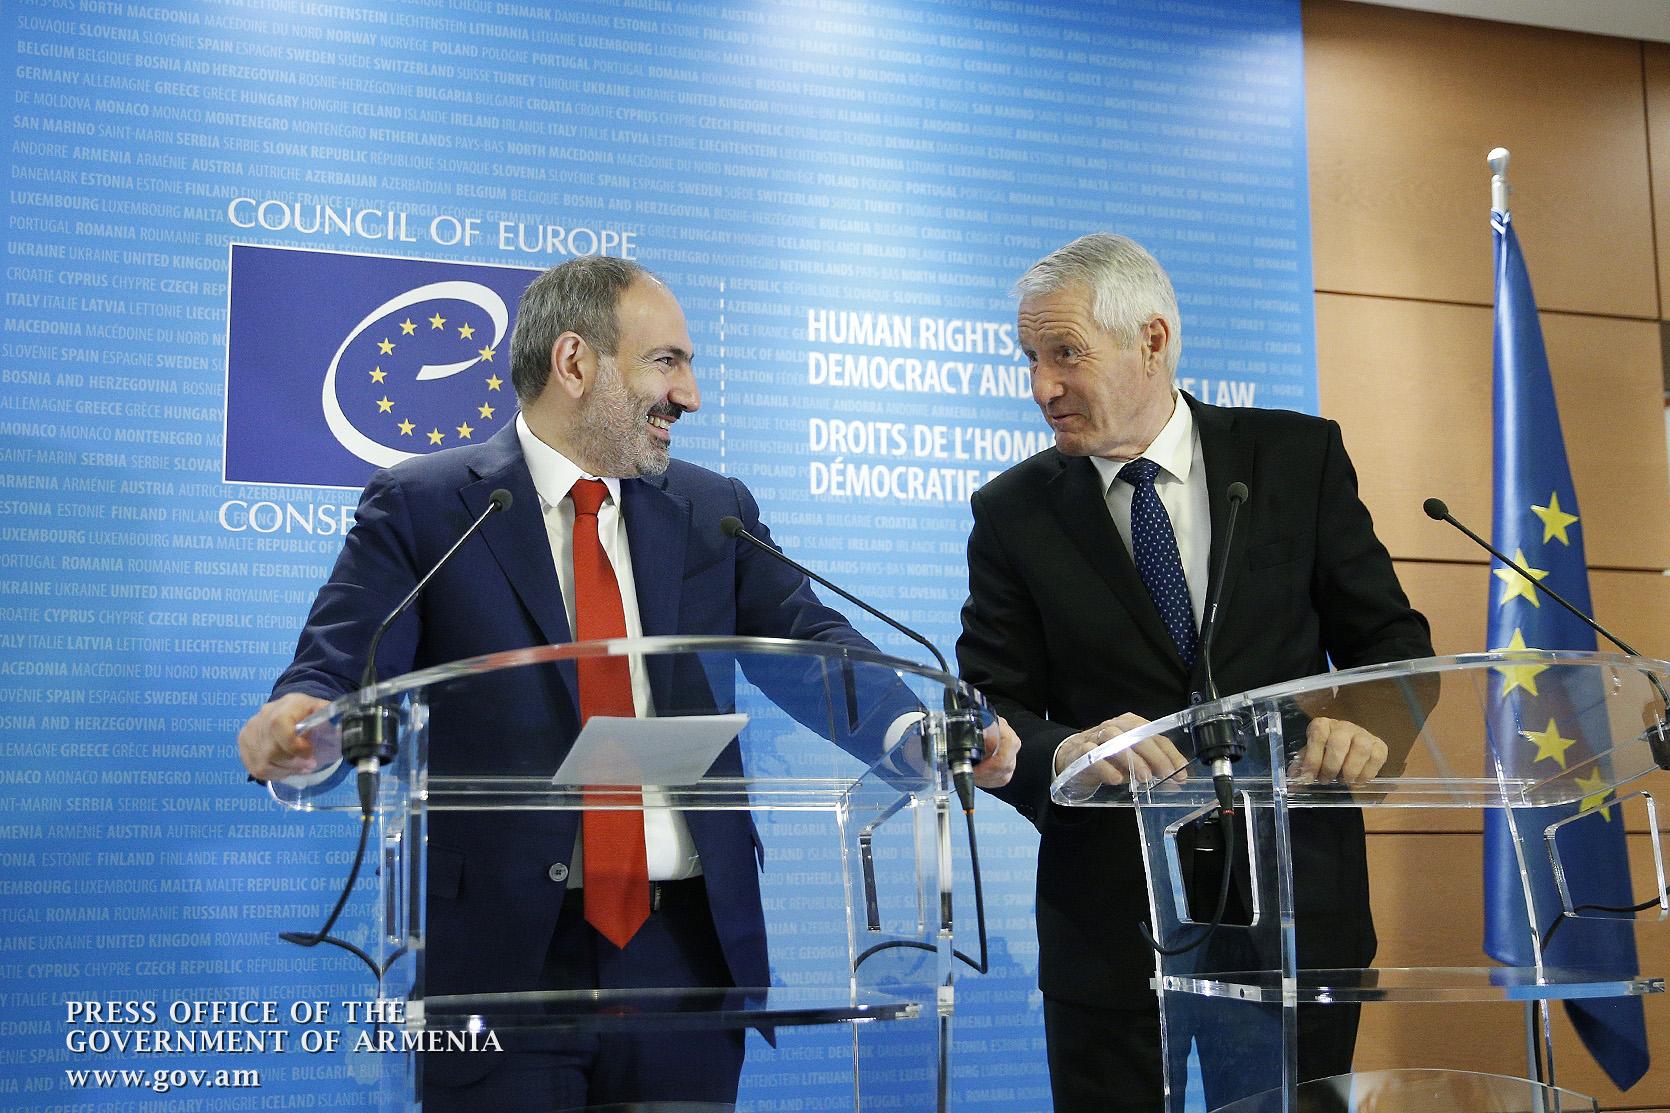 Armenia Will Continue to Work With the Council of Europe and Promote Human Rights